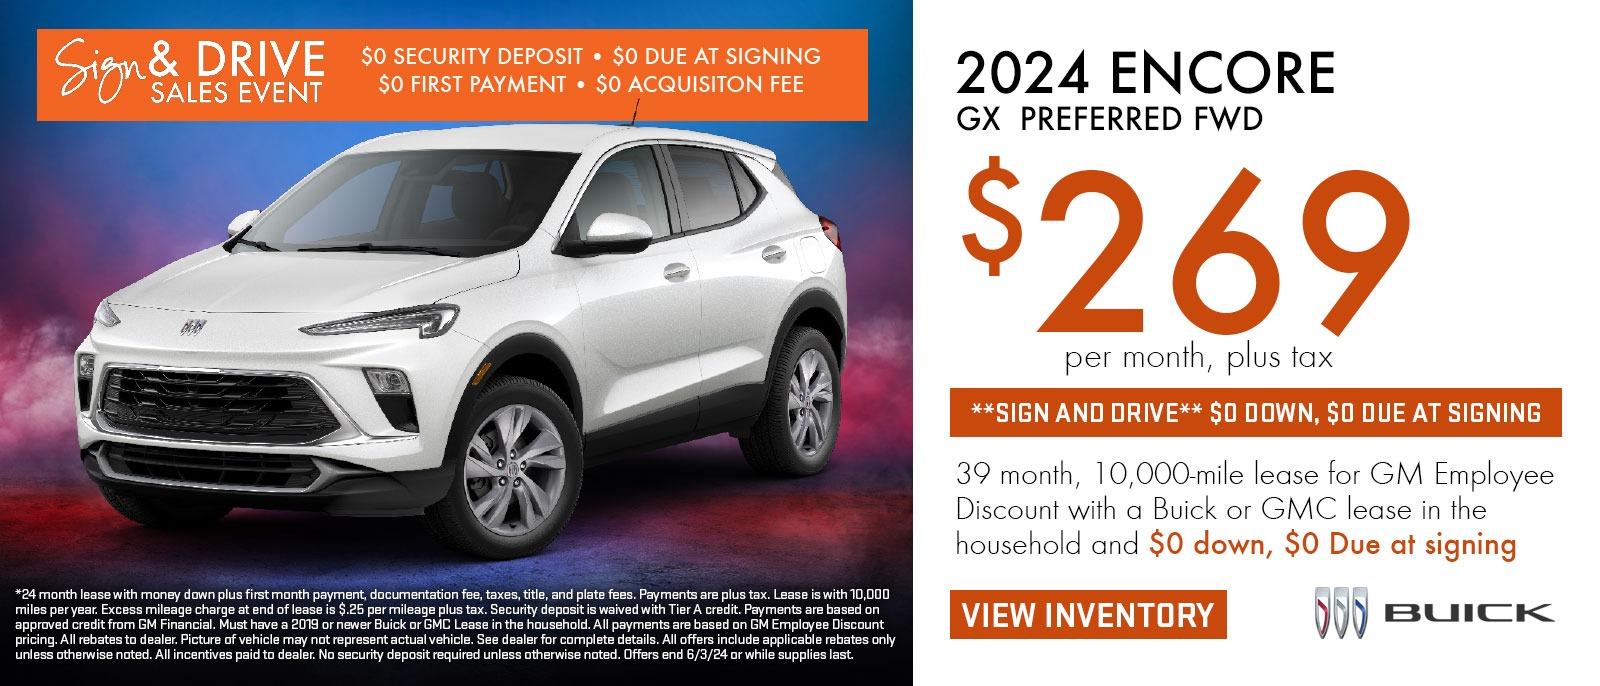 2024 Encore GX Preferred FWD
$269 per month, plus tax
**Sign And Drive** $0 Down, $0 Due at signing
39 months, 10,000-mile lease for GM Employee Discount with a Buick or GMC lease in the household and $0 down, $0 due at signing